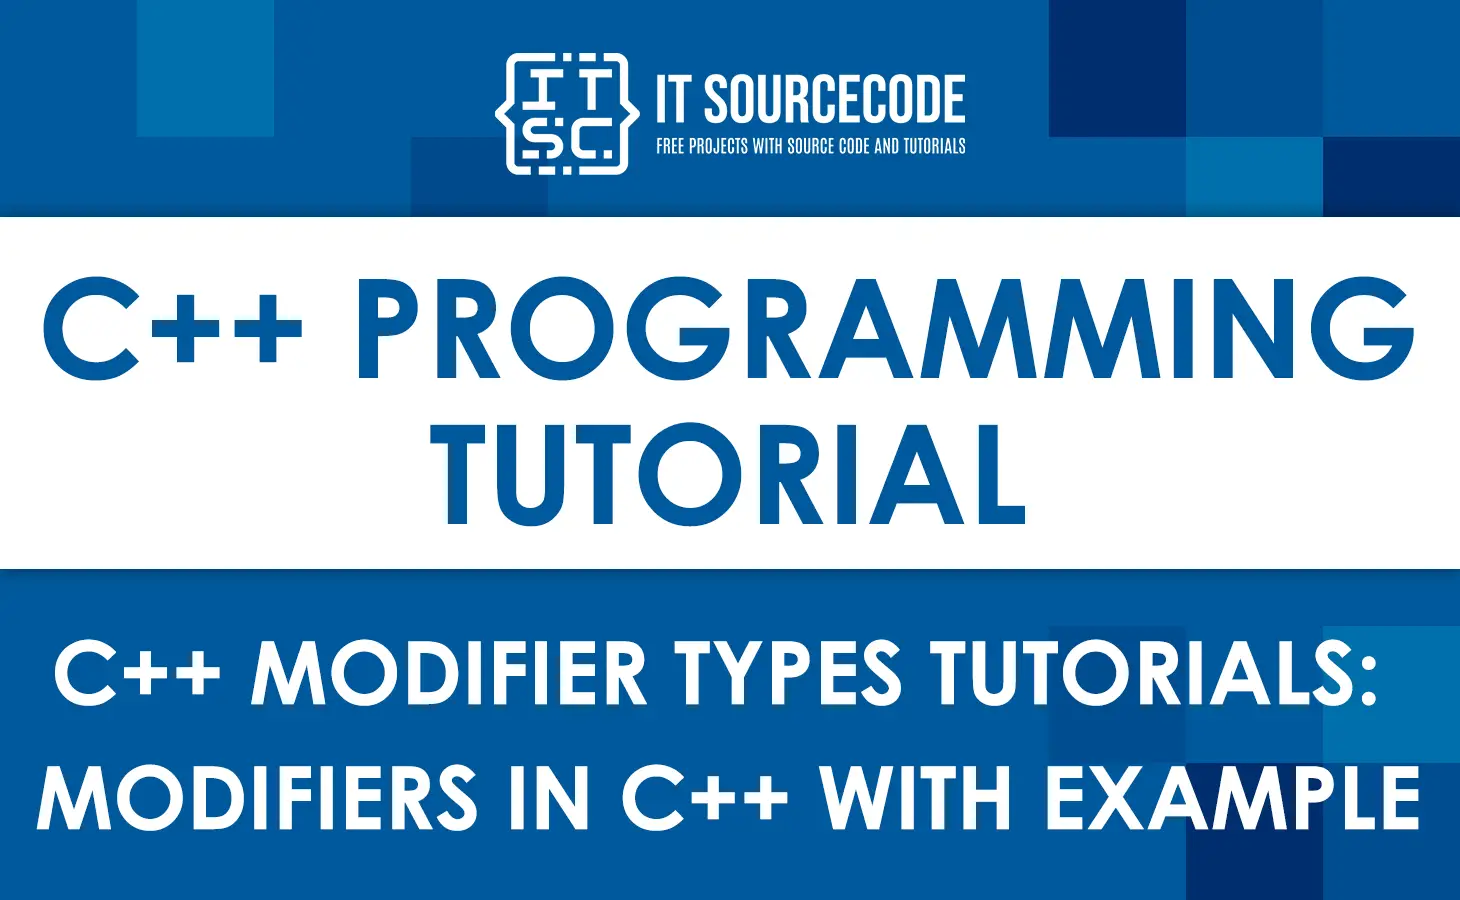 C++ Modifier Types Tutorials - Modifiers in C++ with Example